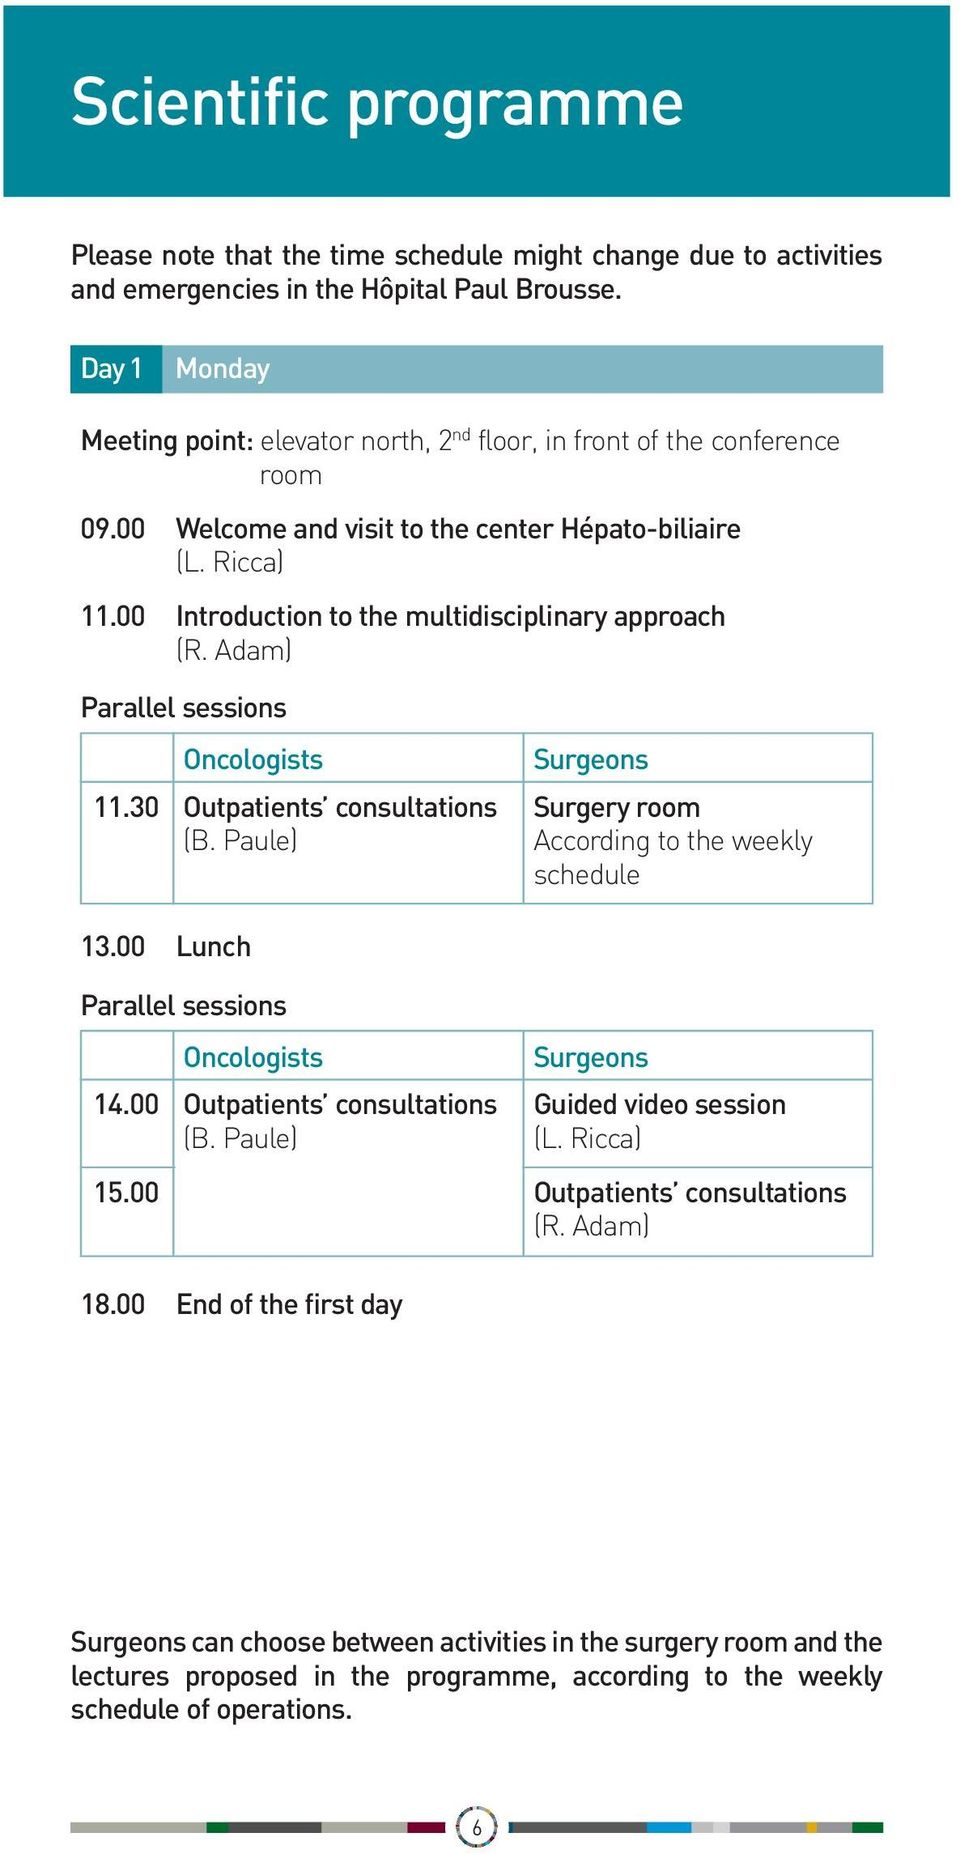 00 Introduction to the multidisciplinary approach (R. Adam) Parallel sessions 10.00 11.30 Oncologists Outpatients consultations (B. Paule) Surgeons Surgery room According to the weekly schedule 13.